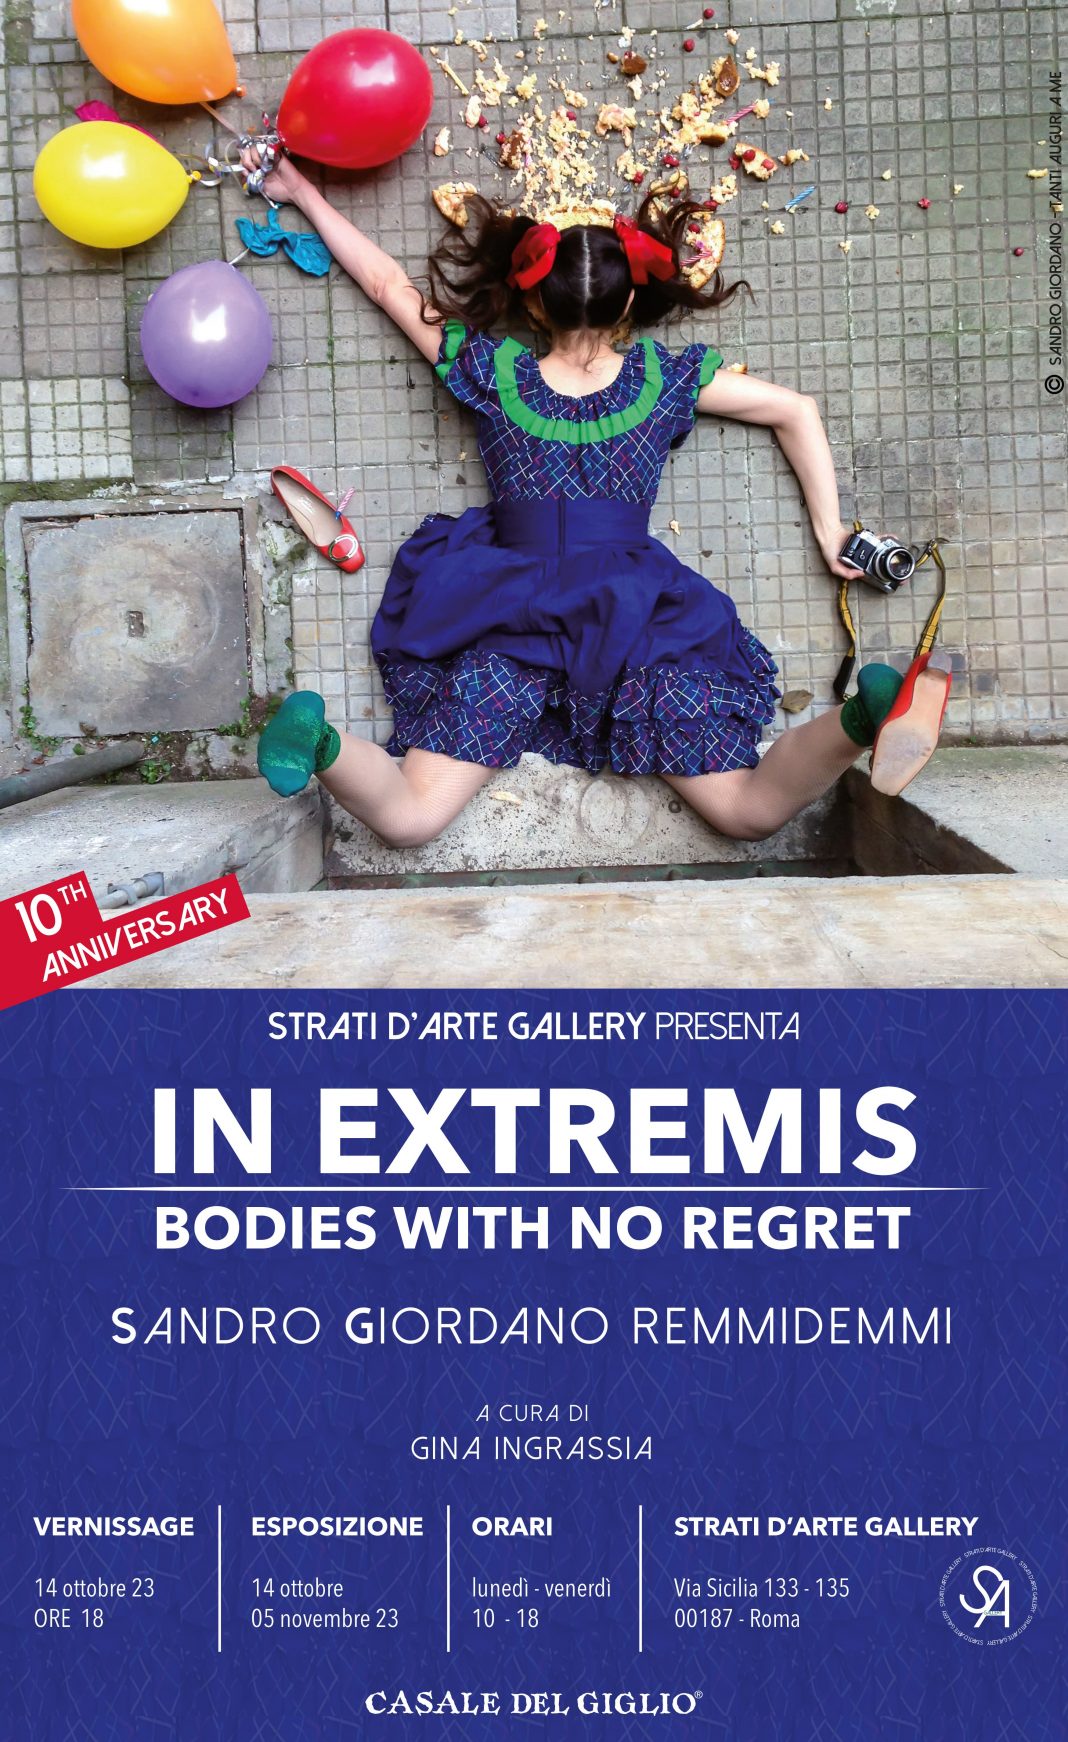 IN EXTREMIS. Bodies with no regrethttps://www.exibart.com/repository/media/formidable/11/img/e52/INVITO-GIORDANO-EXIBART-1068x1742.jpg